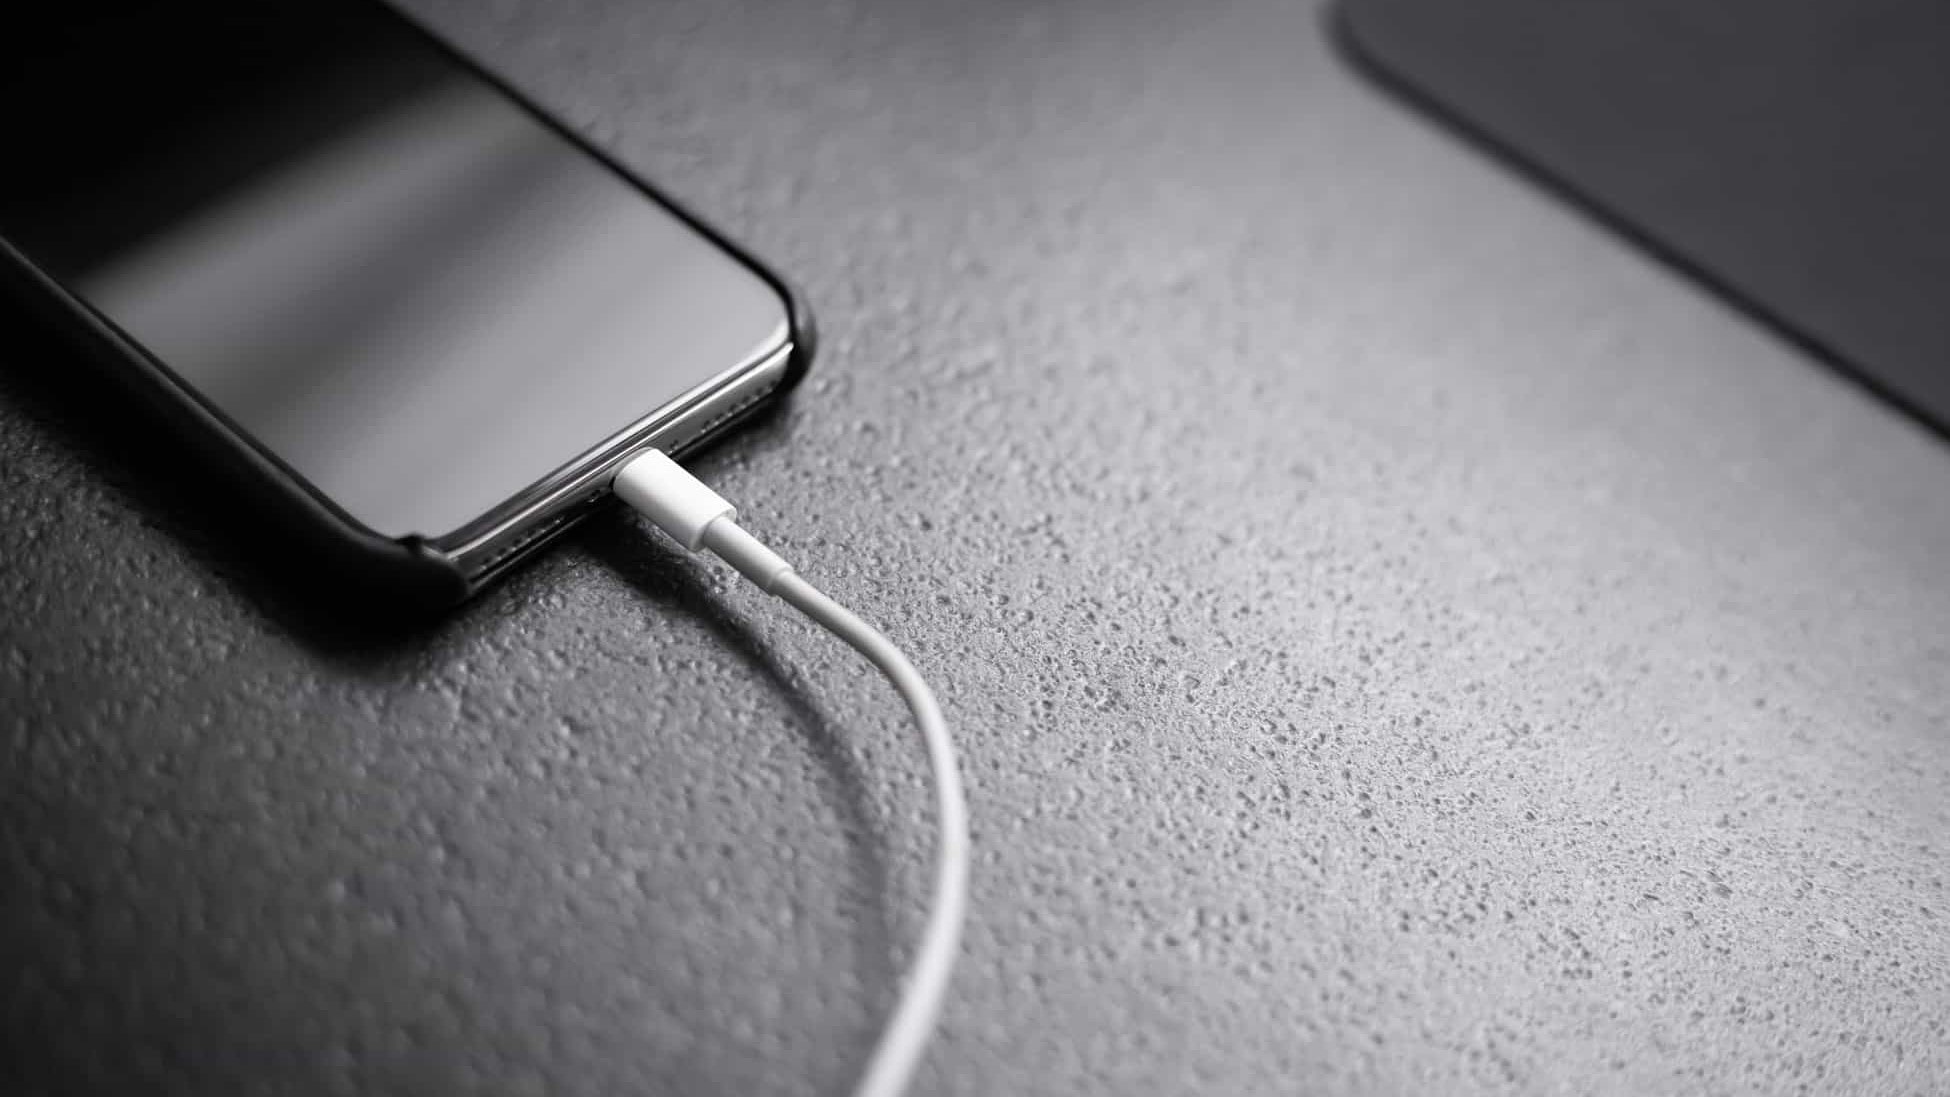 Is it better to fast charge or slow charge my smartphone?